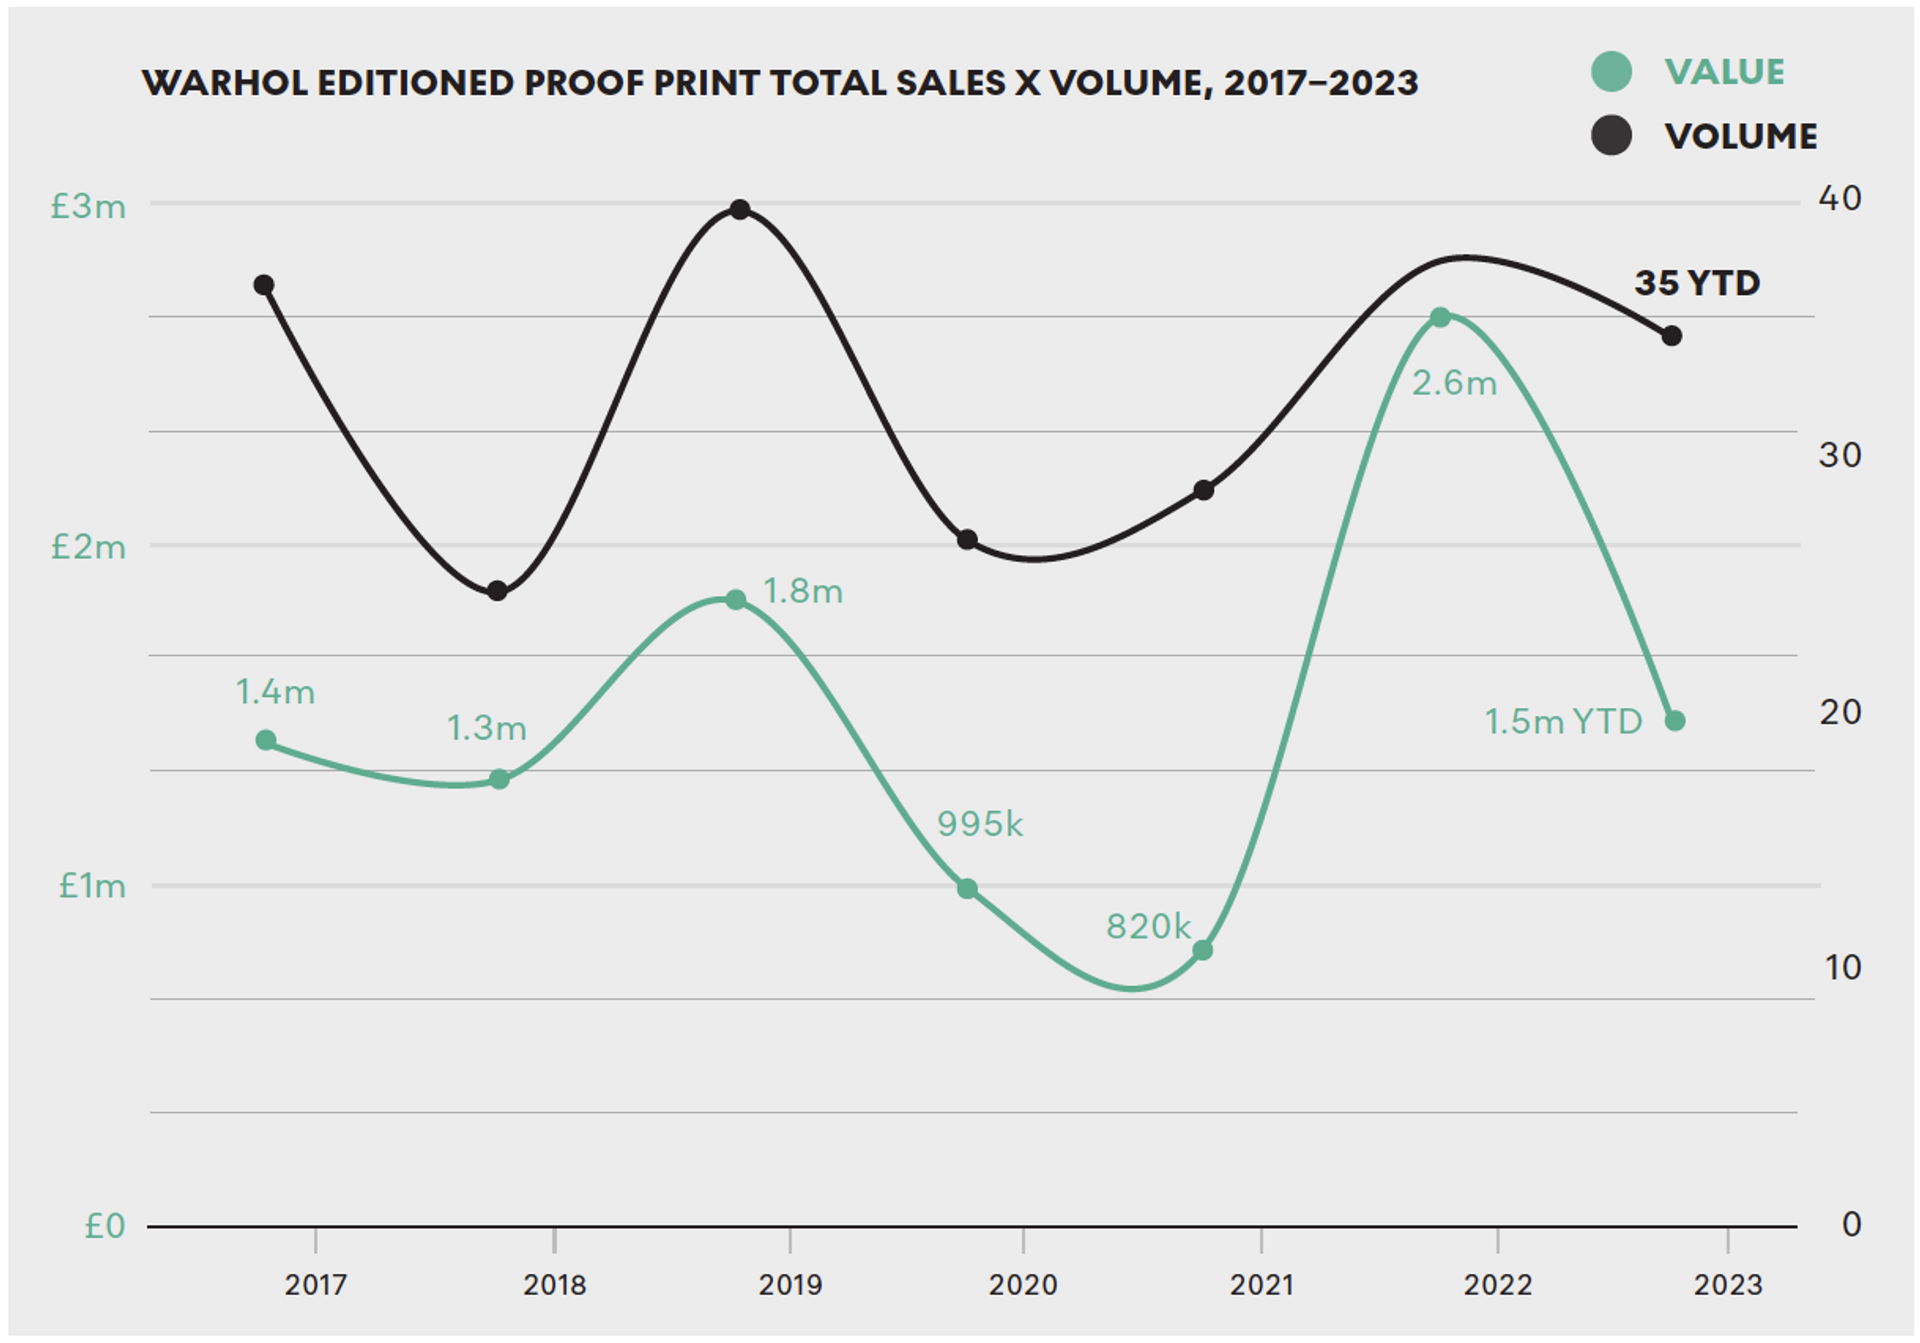 A double line graph depicting Andy Warhol's Editioned Proof print performance over five years, showing total sales and total sales by volume.